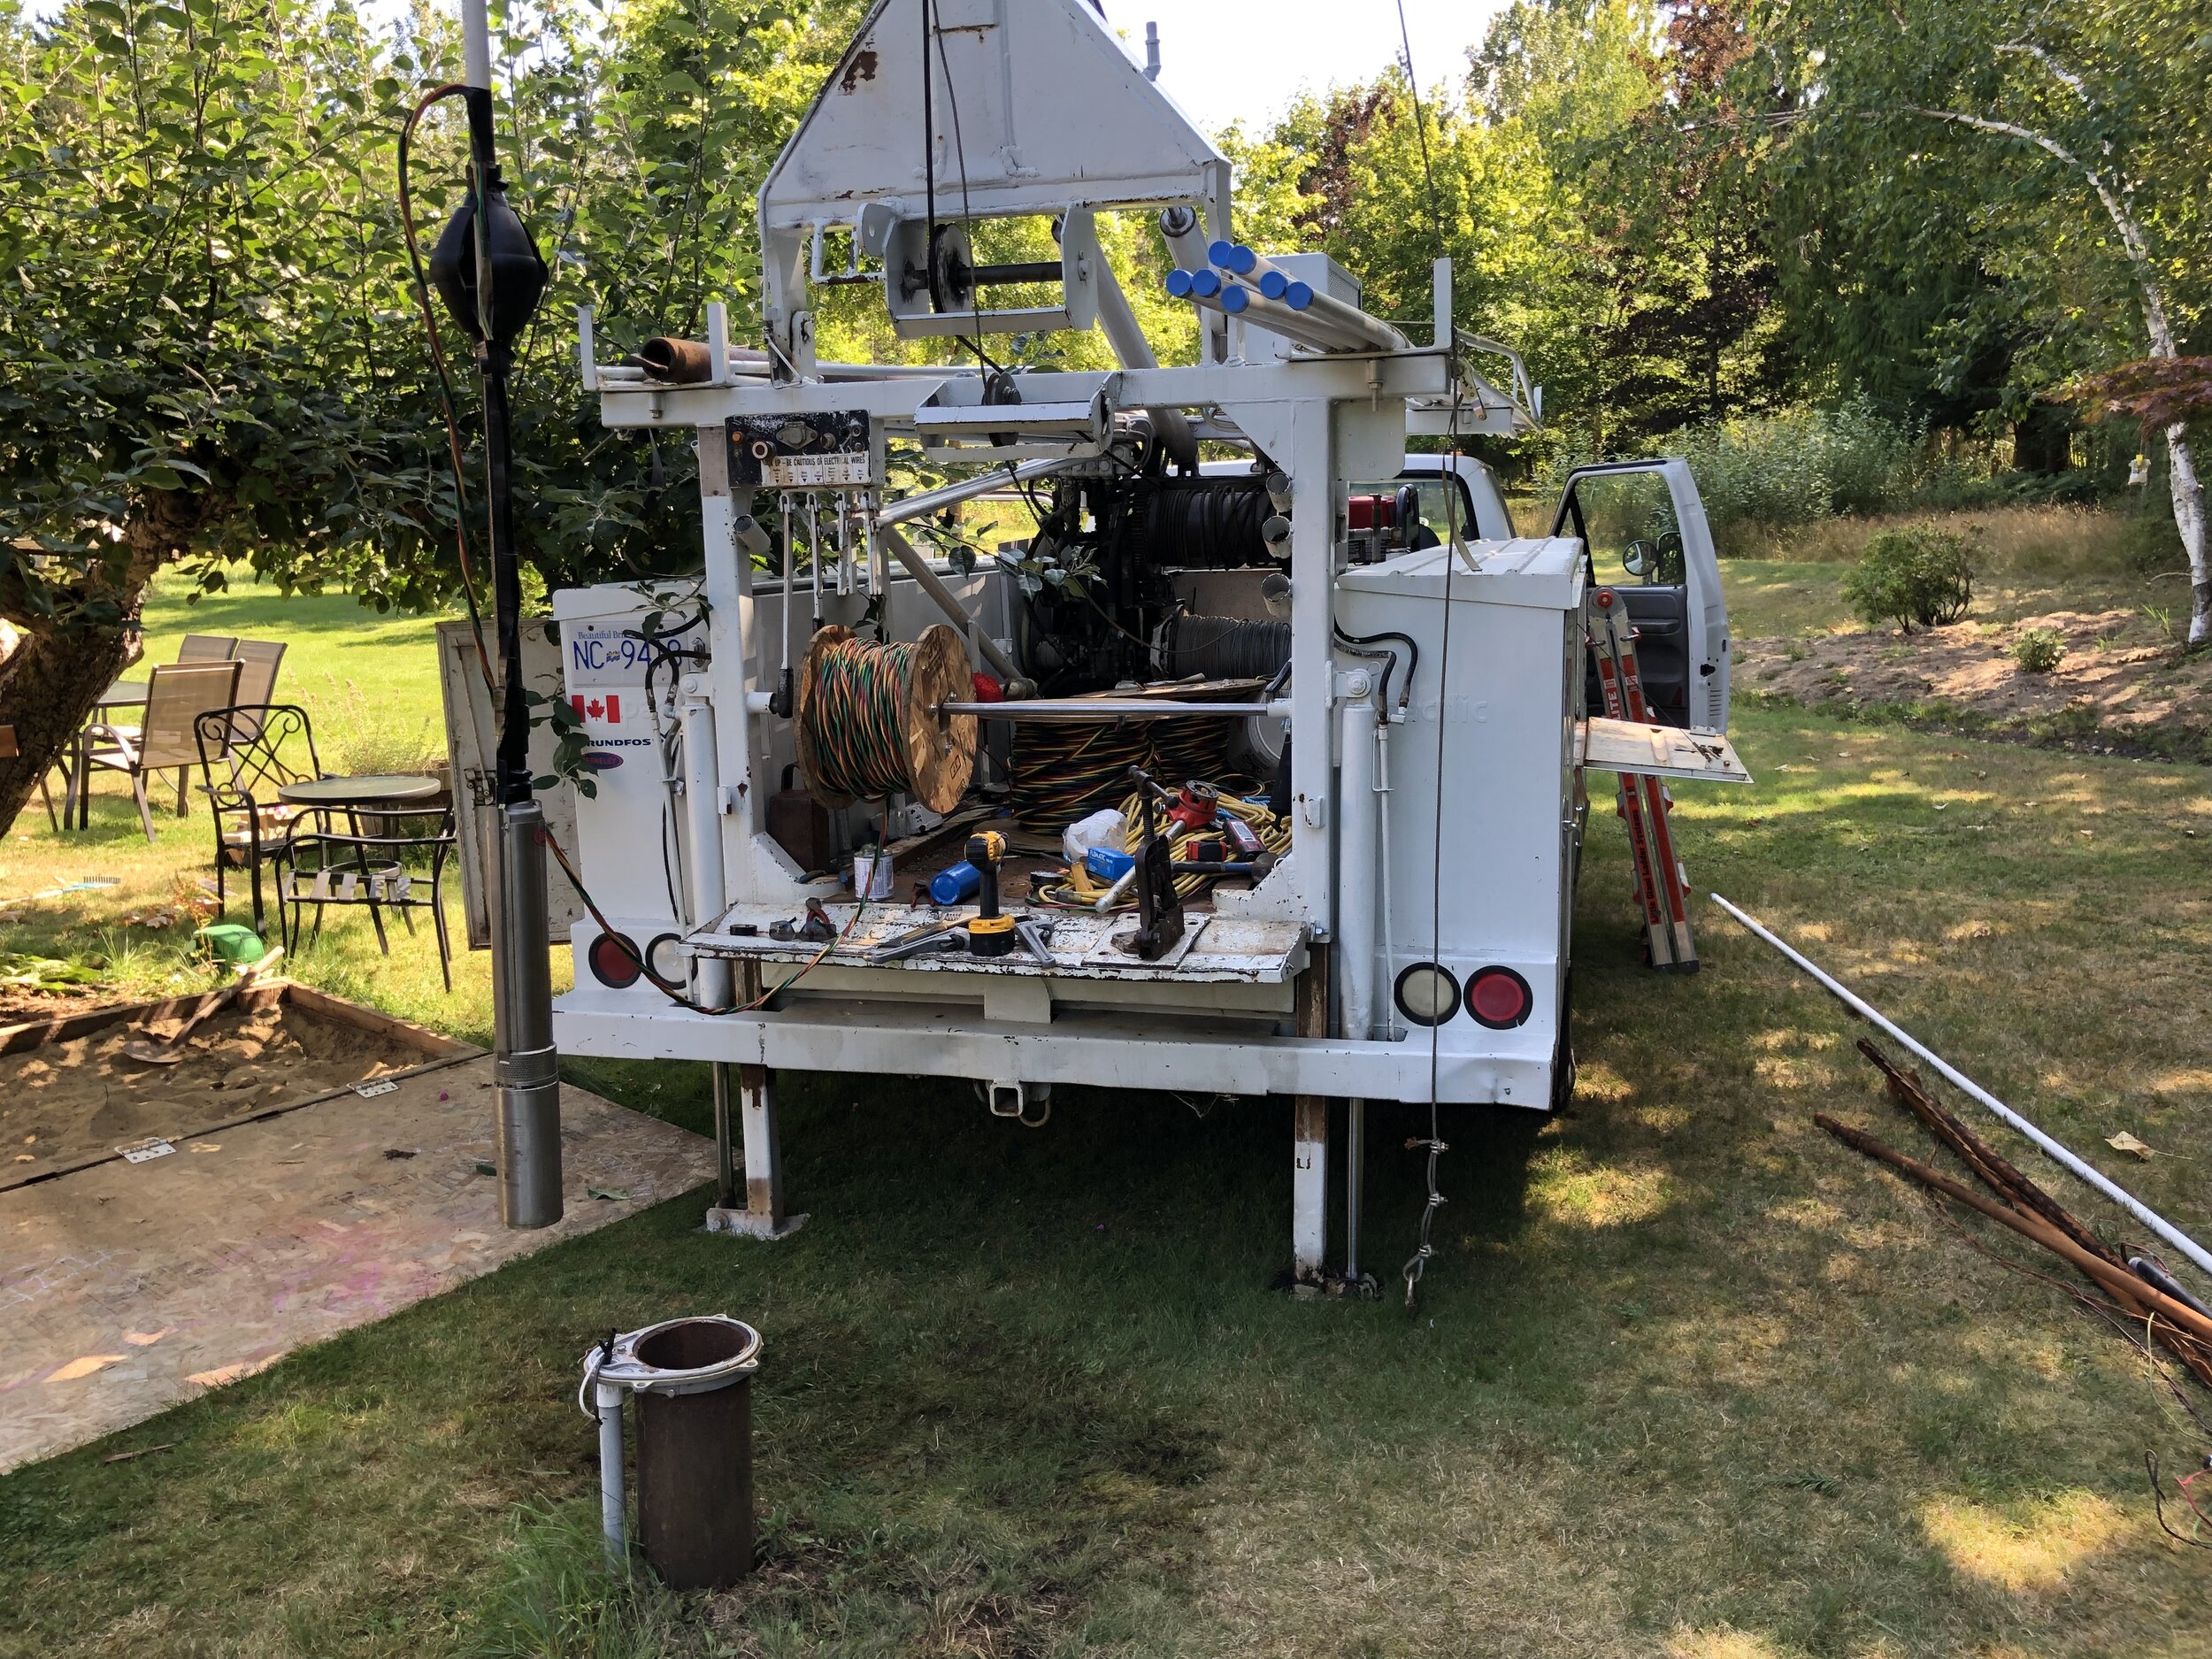 New pump installation after 30+ year pump failed. 